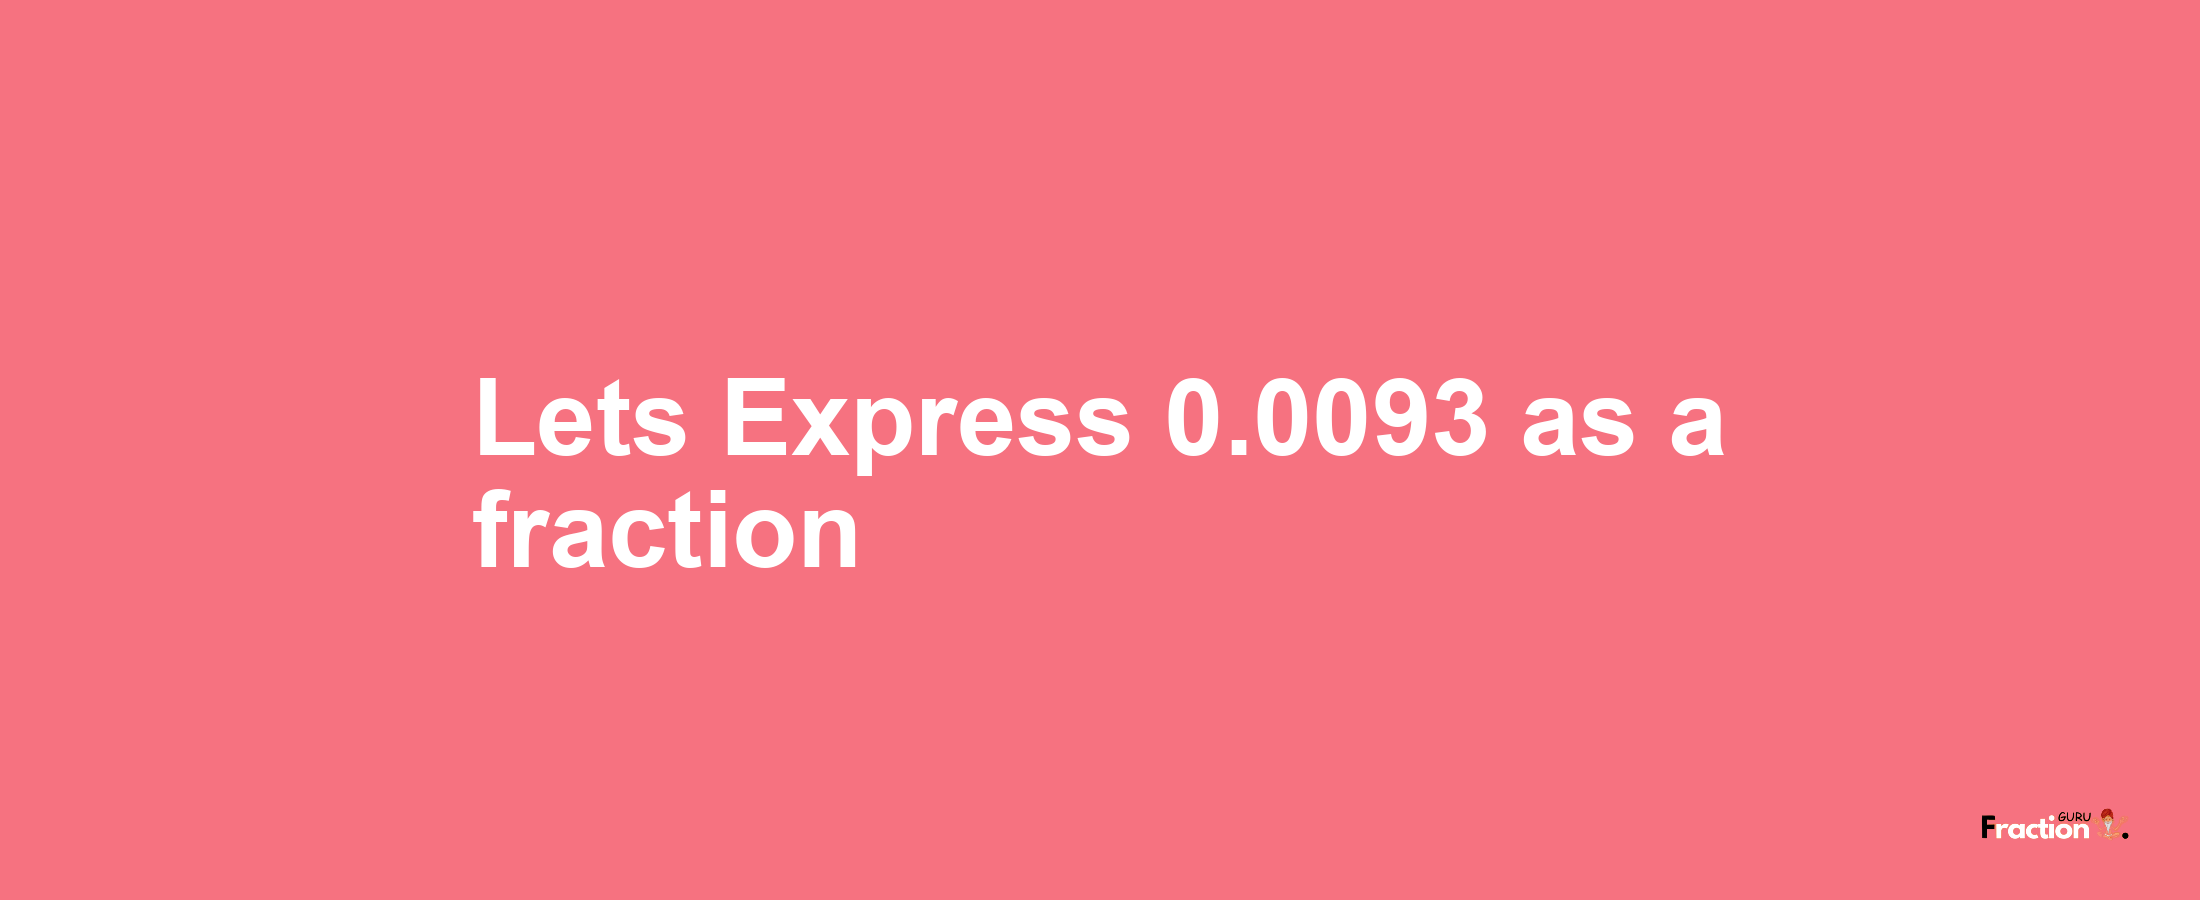 Lets Express 0.0093 as afraction